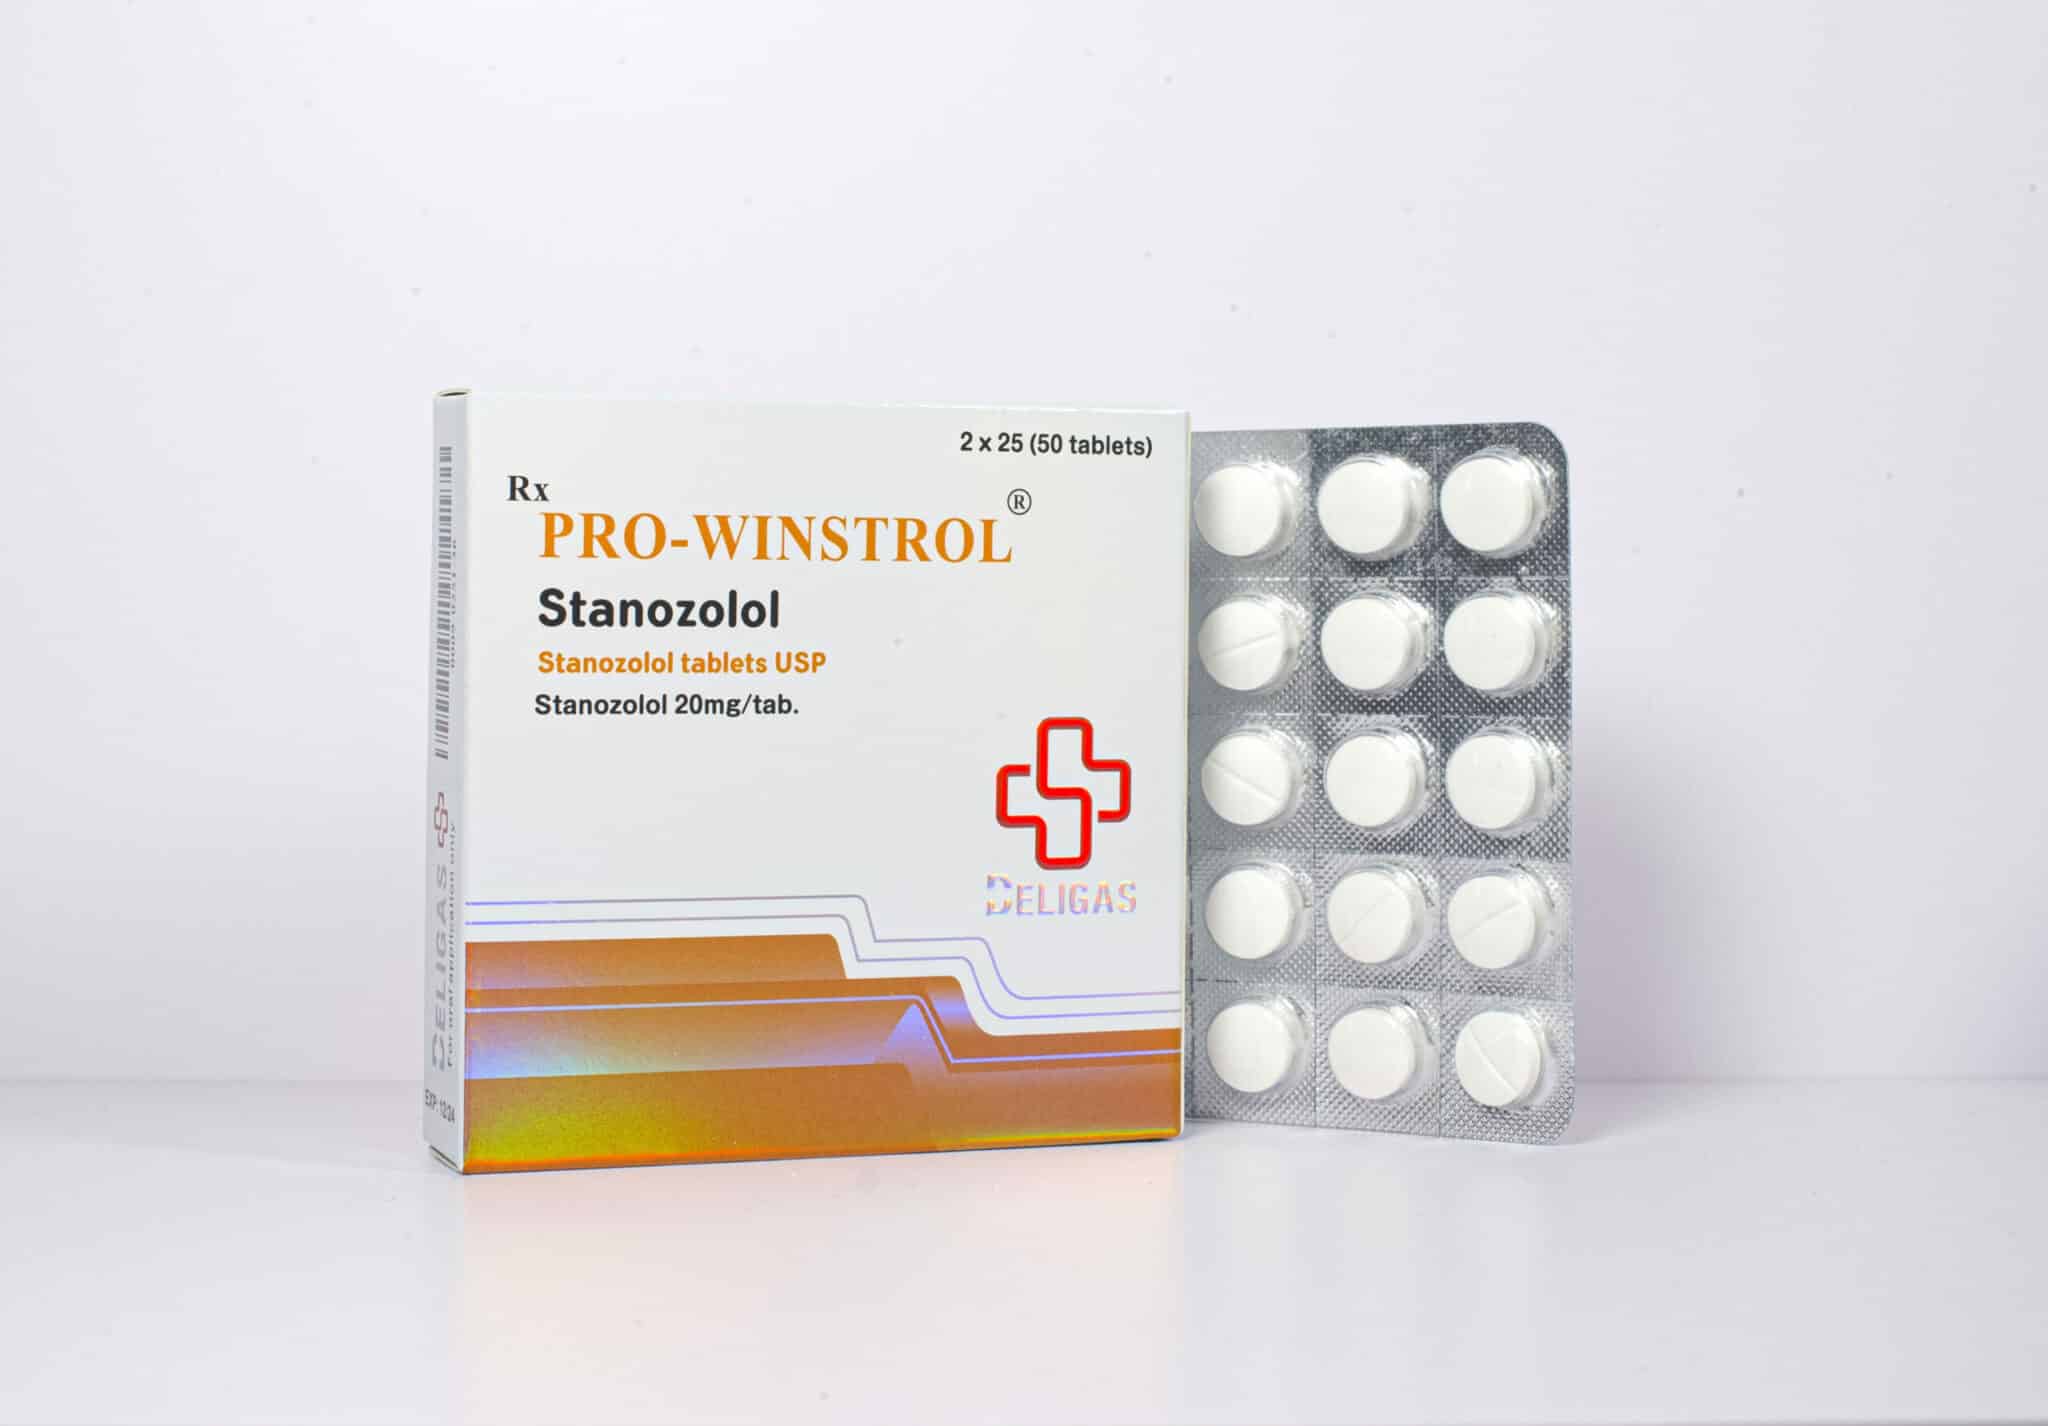 Winstrol For Sale to reduce fat